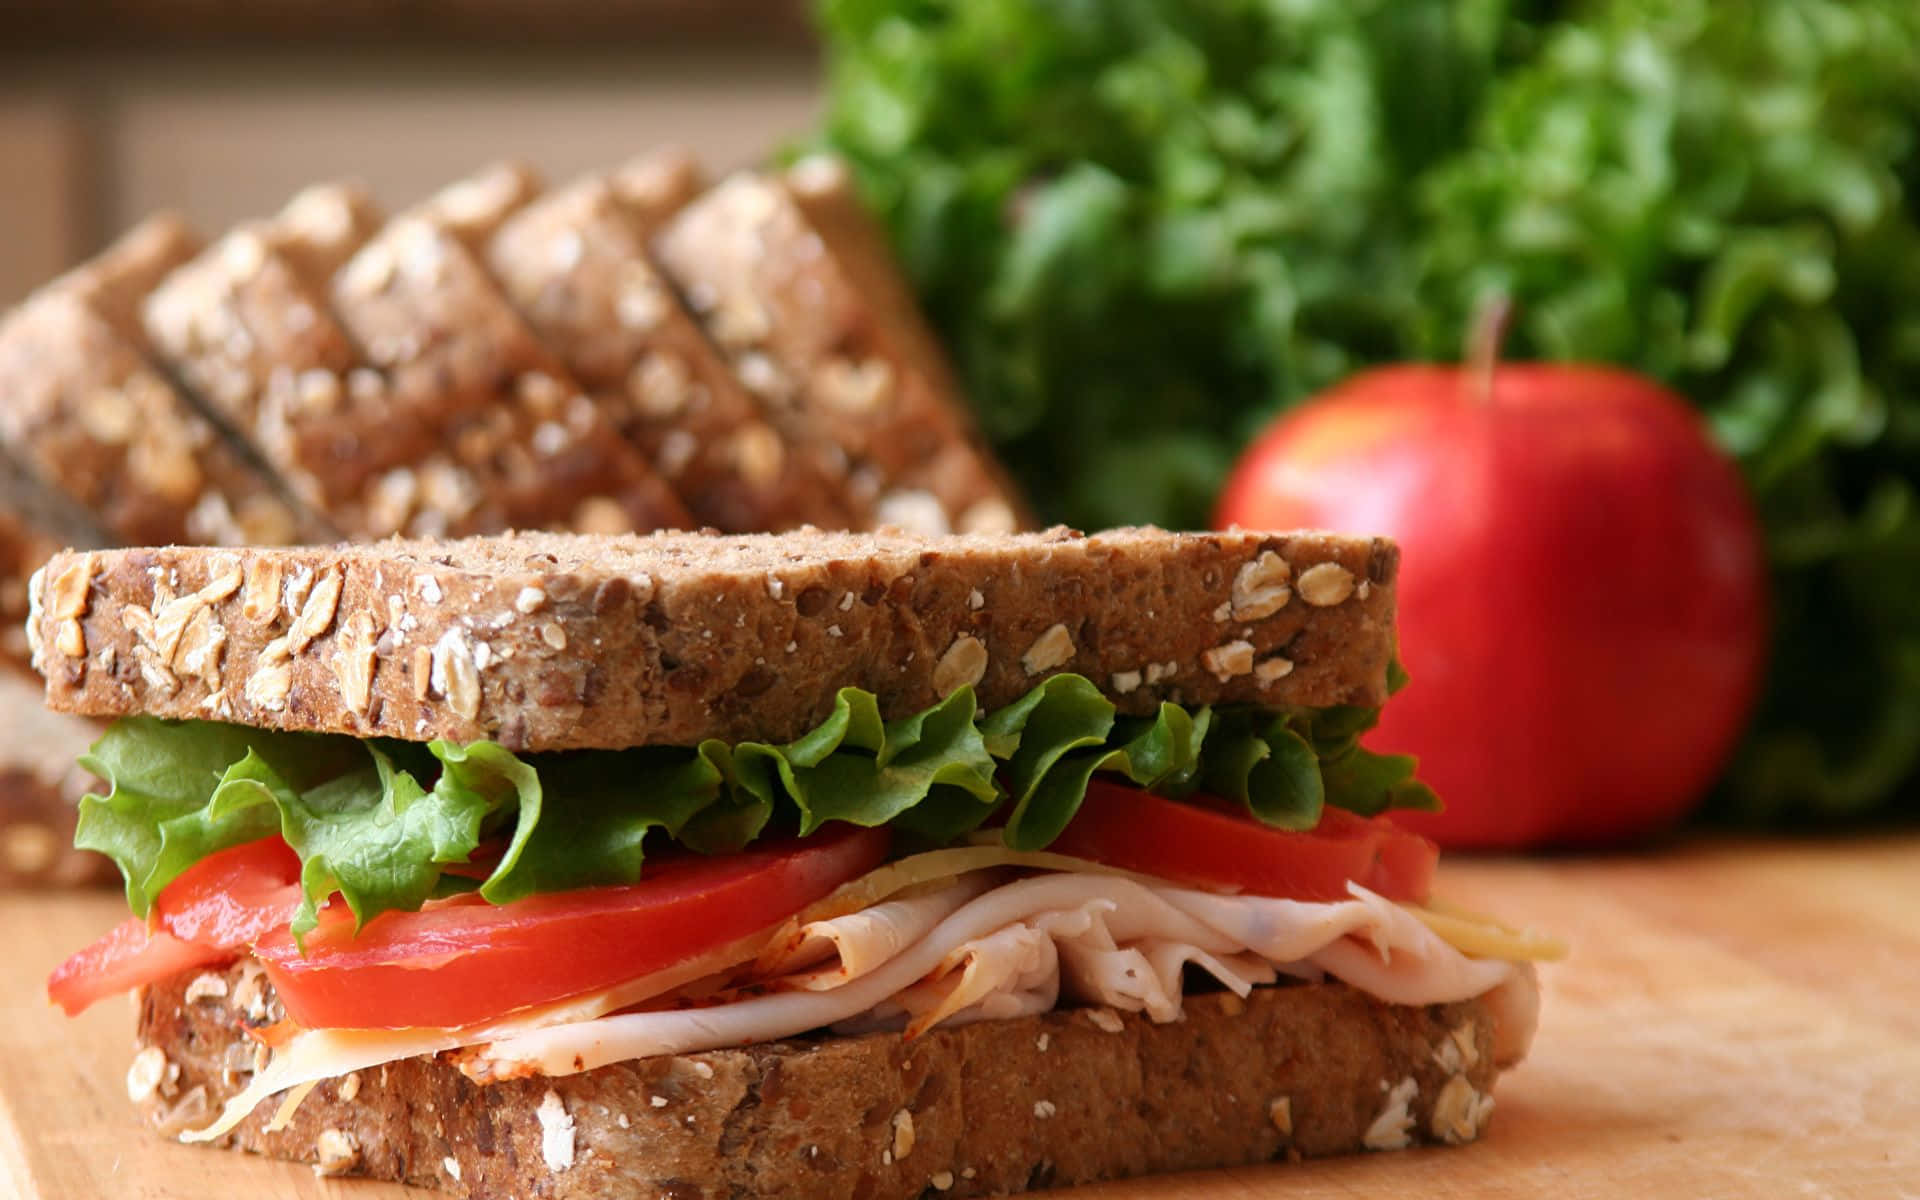 A Sandwich With Lettuce, Tomatoes, And Turkey